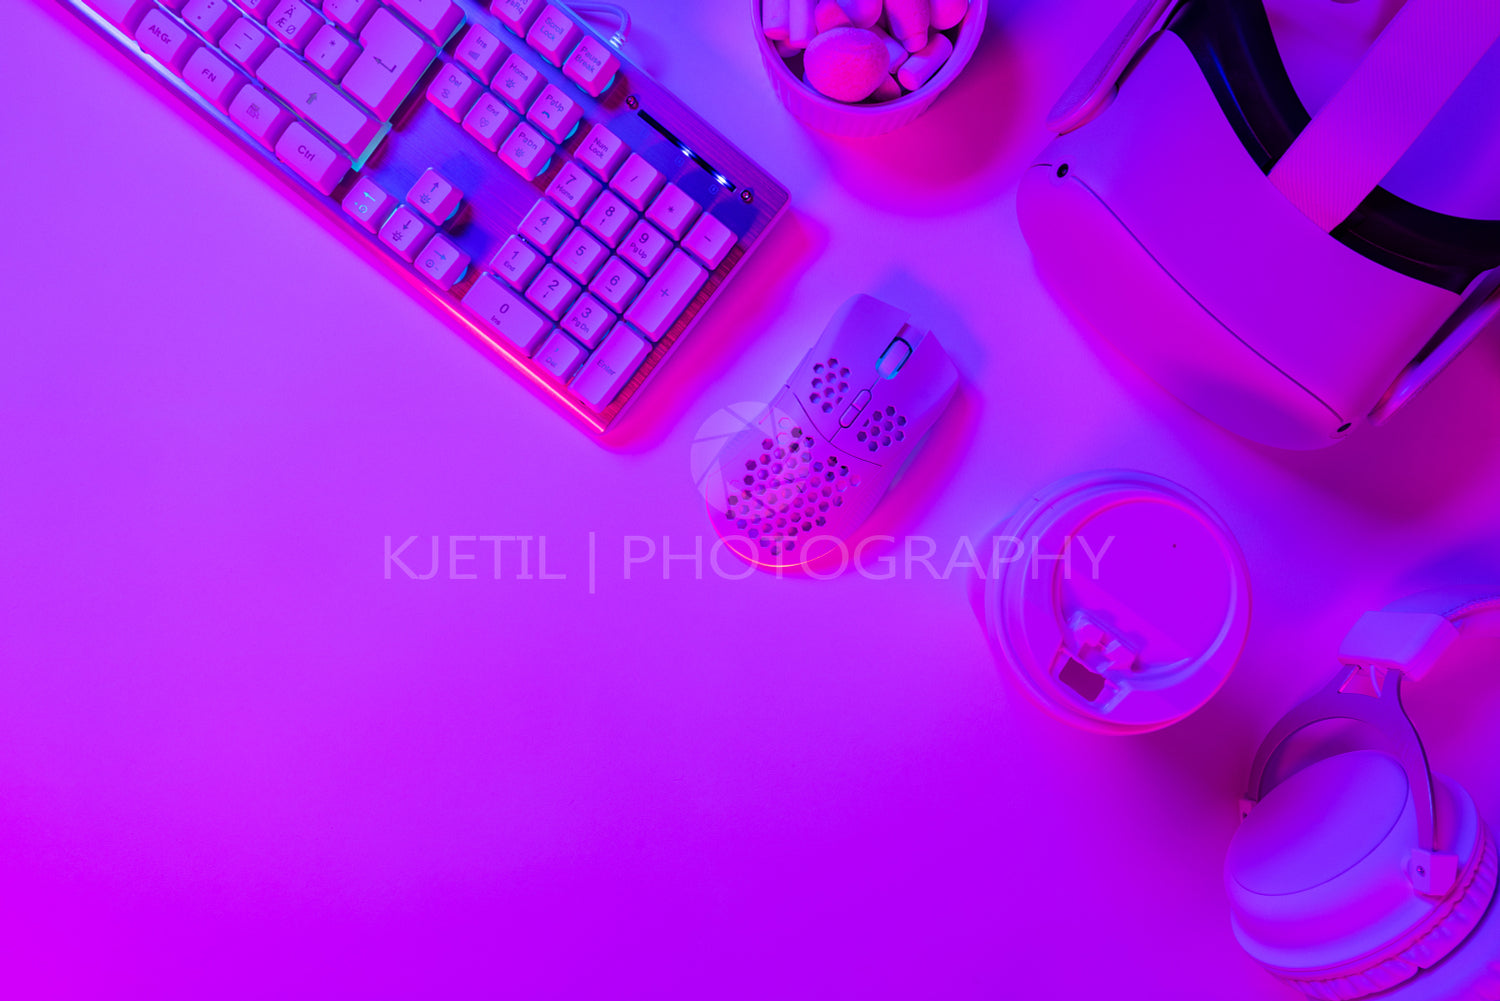 Keyboard with mouse and cup on gaming desk